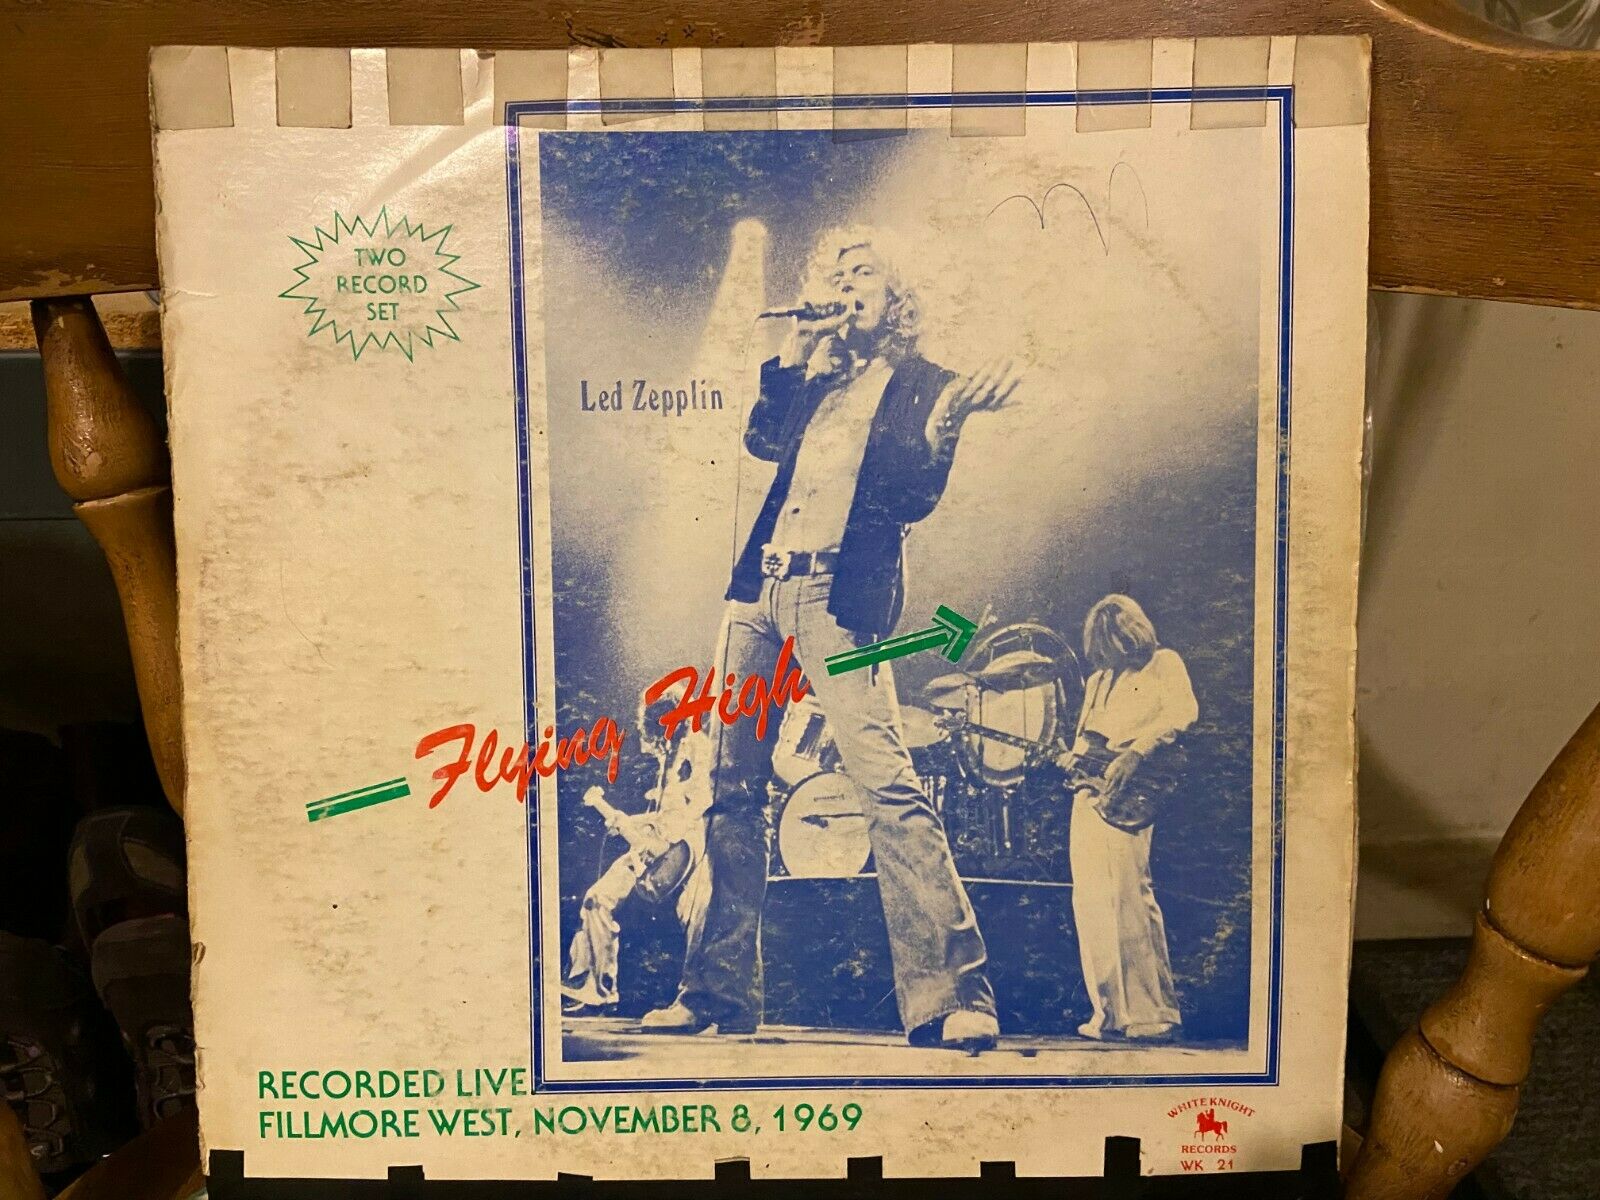 popsike.com - LED ZEPPELIN FLYING HIGH Recorded Live Fillmore West 1969  Double LP WK 21. A-1 - auction details